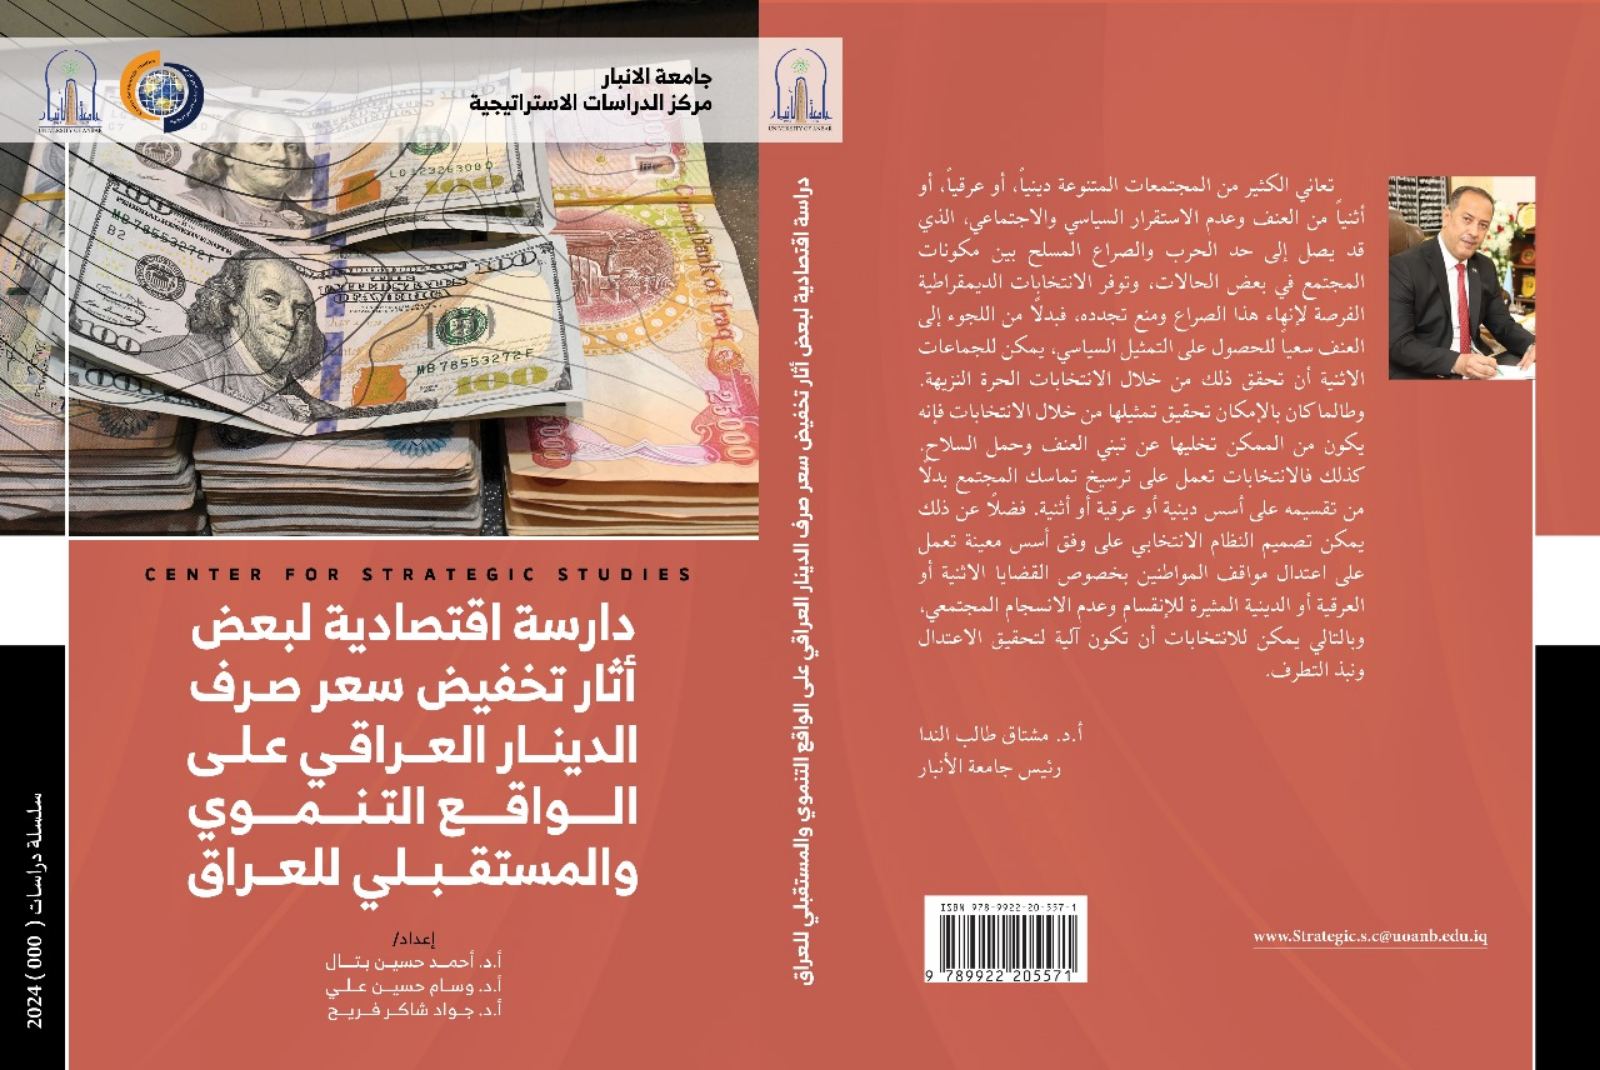 Center publications (an economic study of some of the effects of reducing the Iraqi dinar exchange rate on the development and future reality of Iraq)